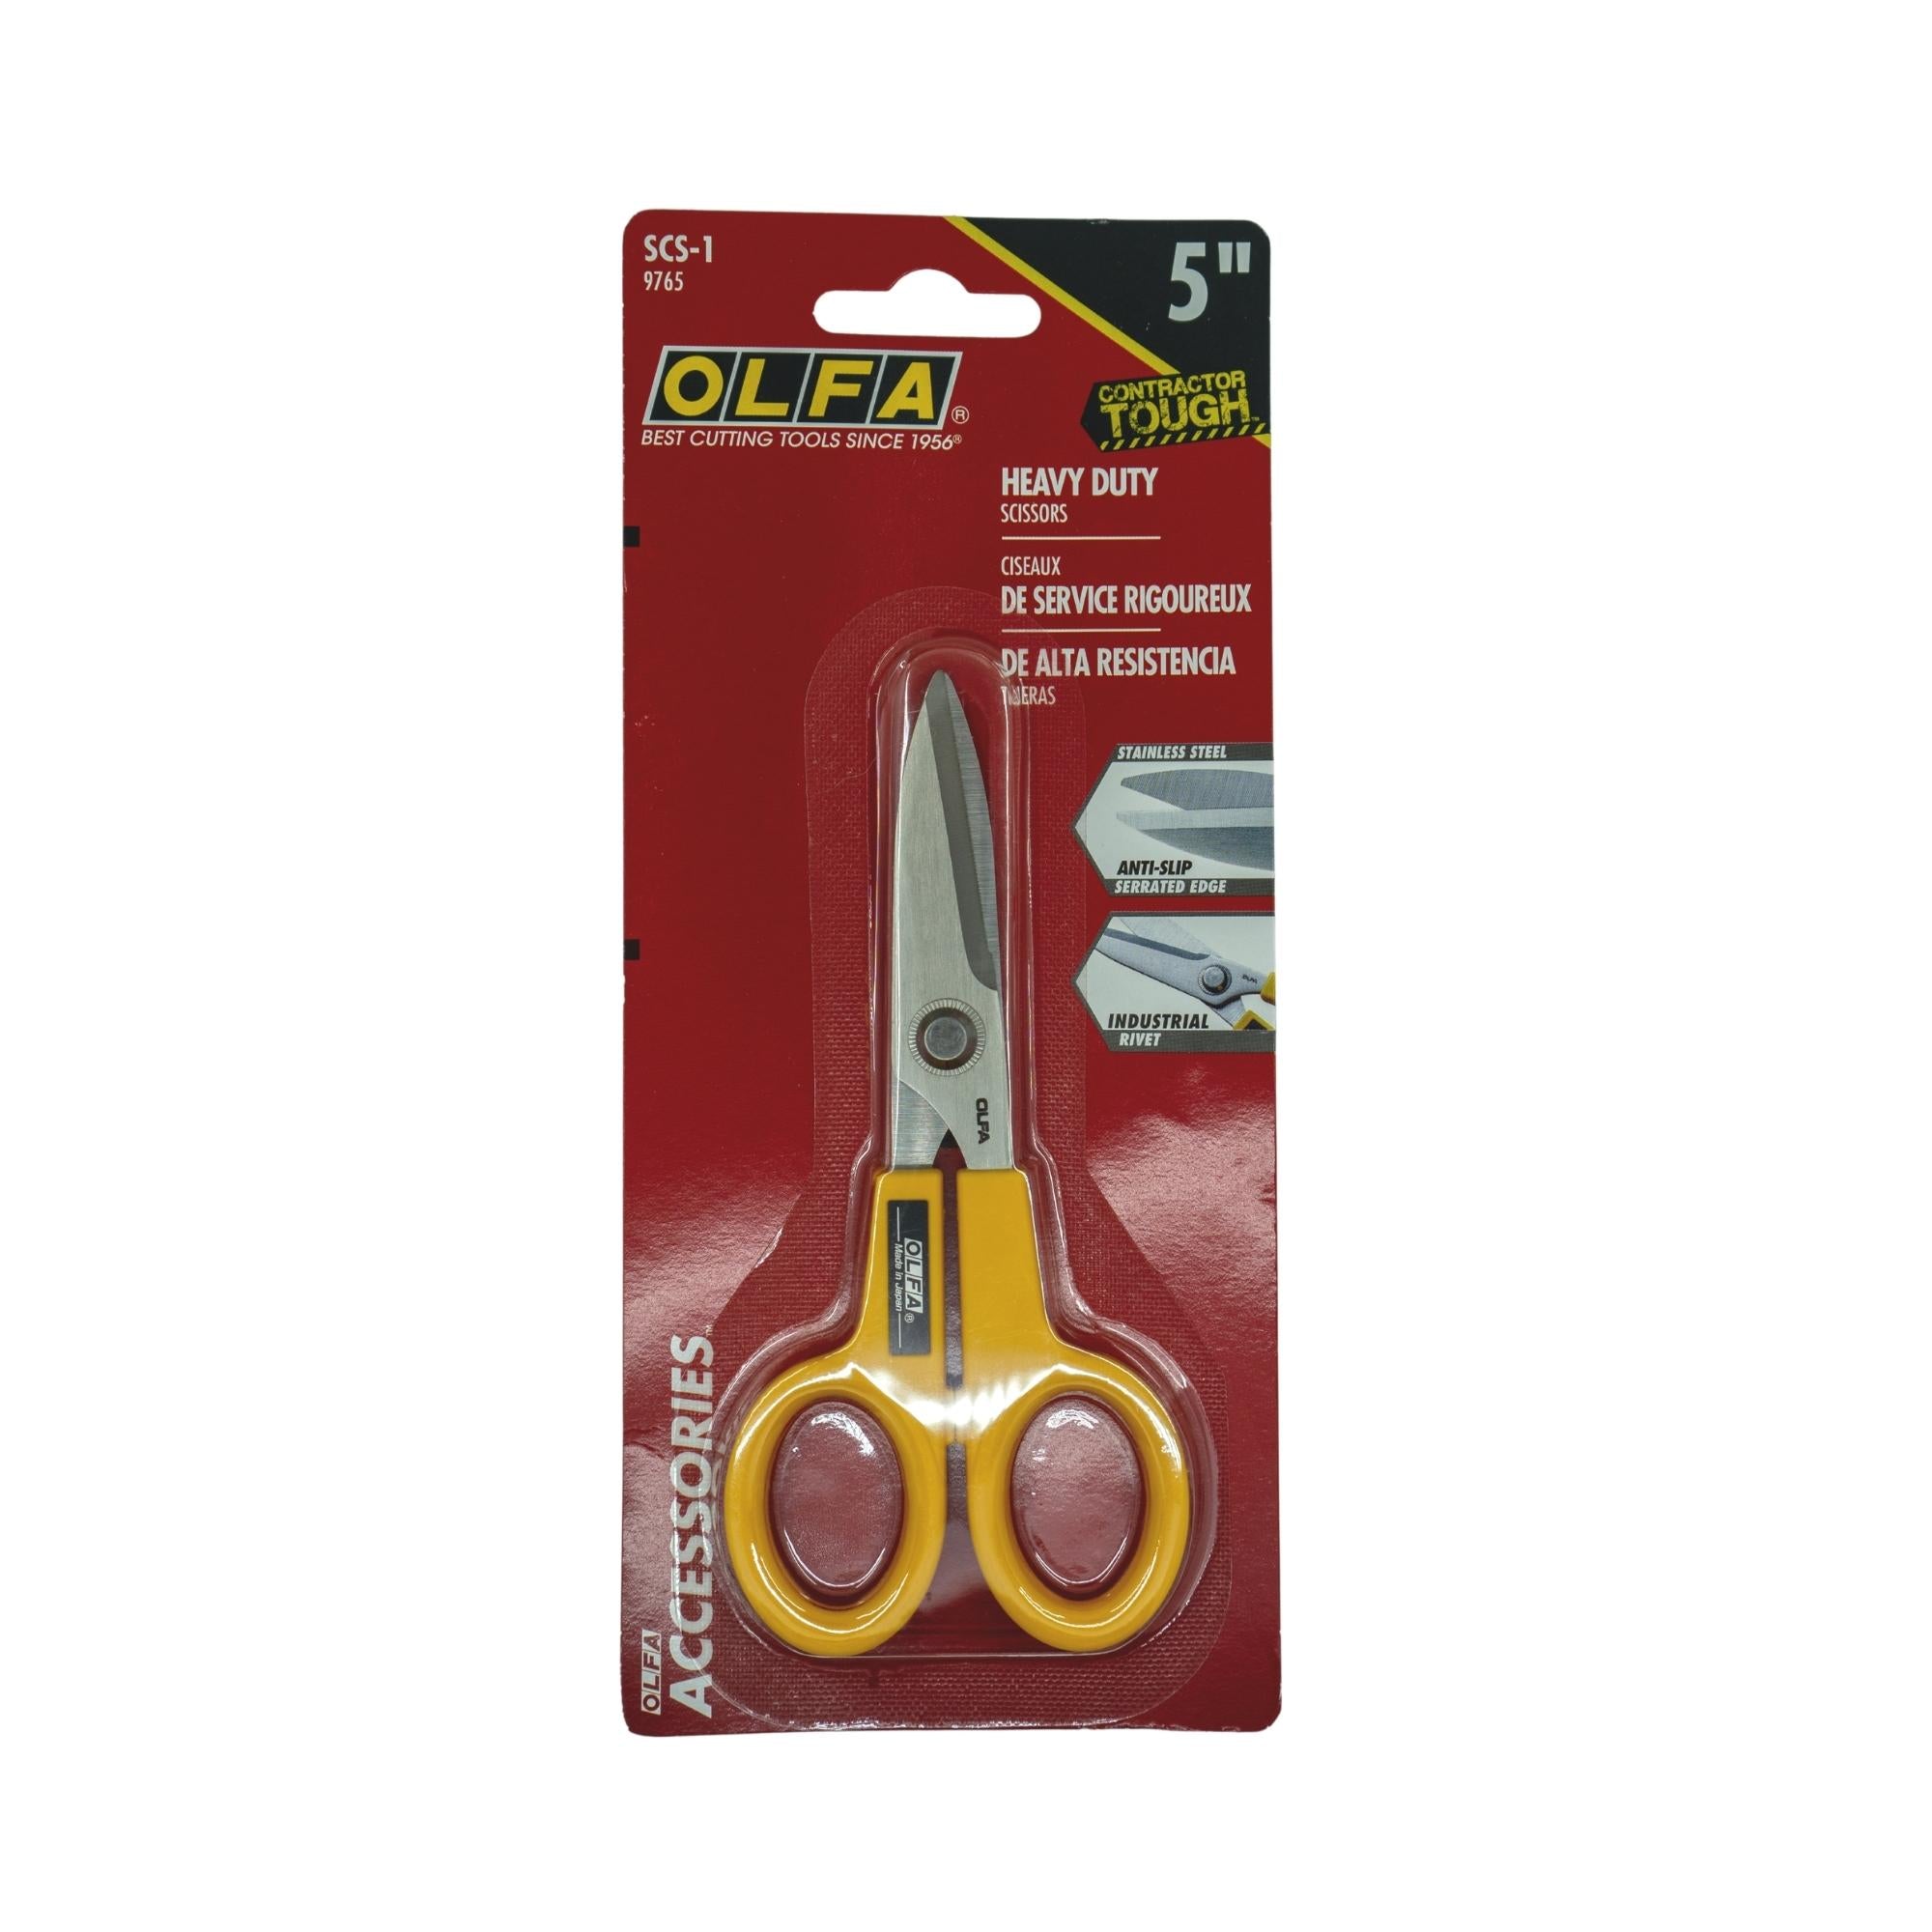 Olfa Pro Quilting & Utility Scissor - Ripstop by the Roll